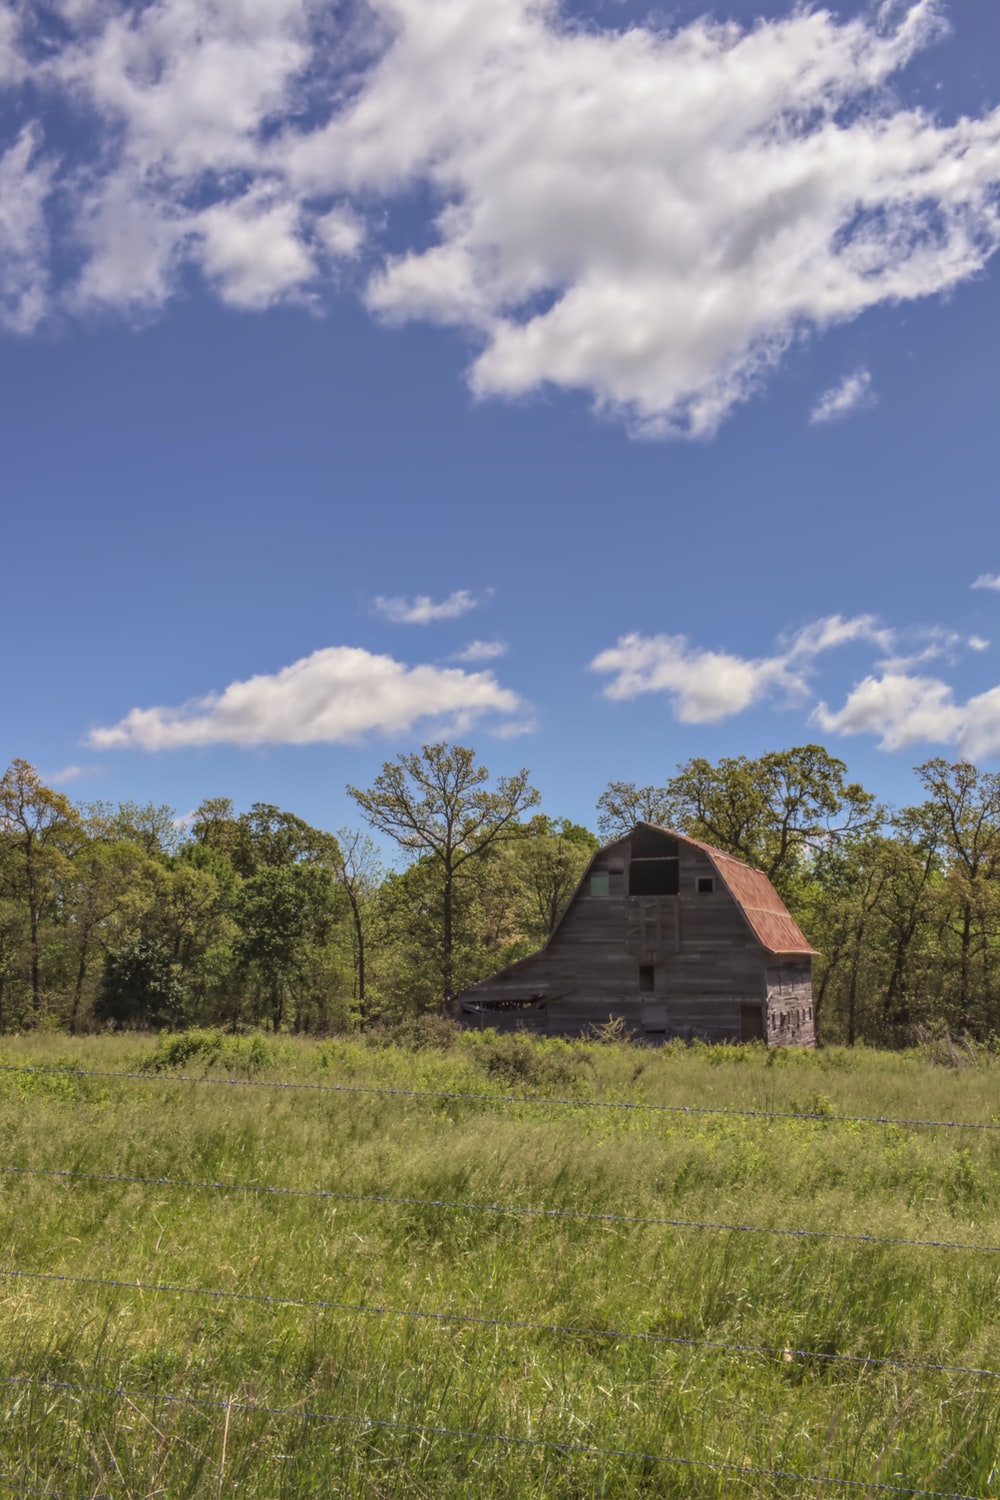 Old Barns Picture. Download Free Image